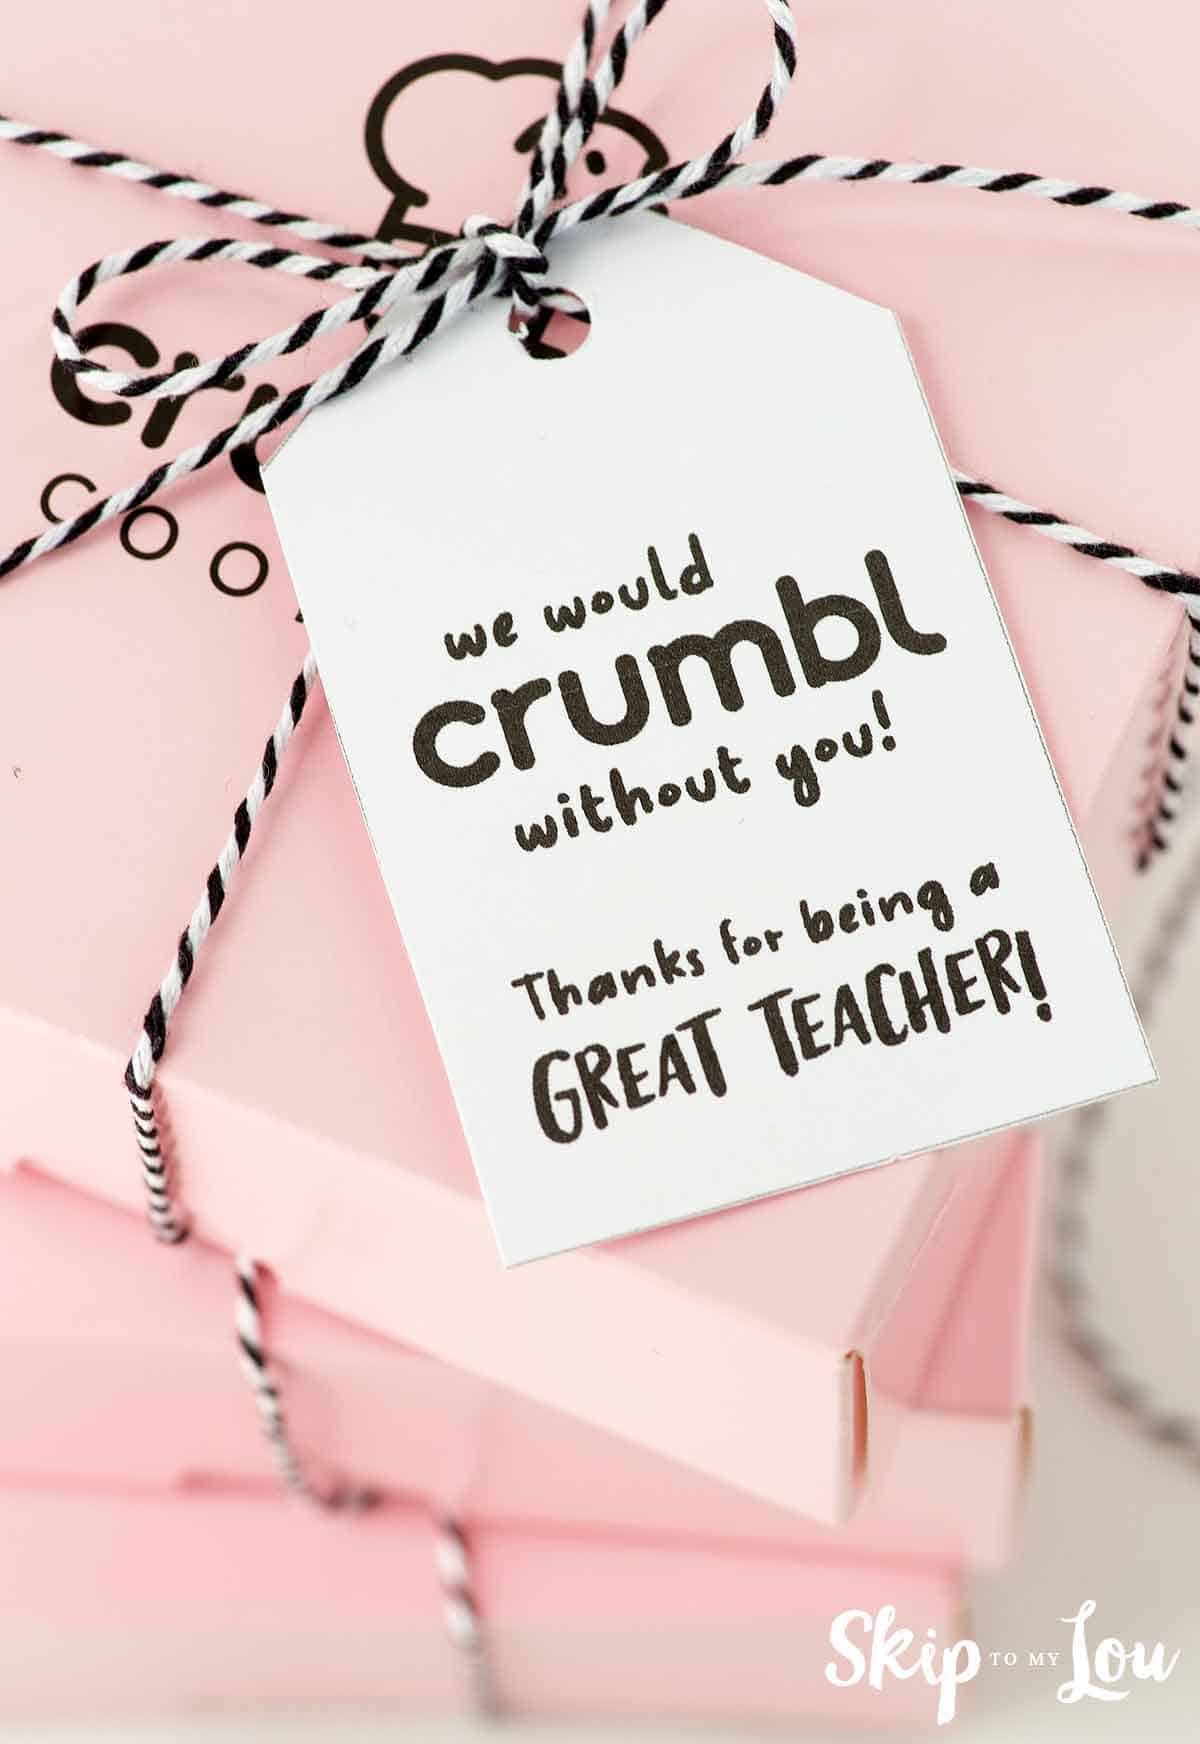 We would crumble without you! Thanks for being a great teacher tag on pink box